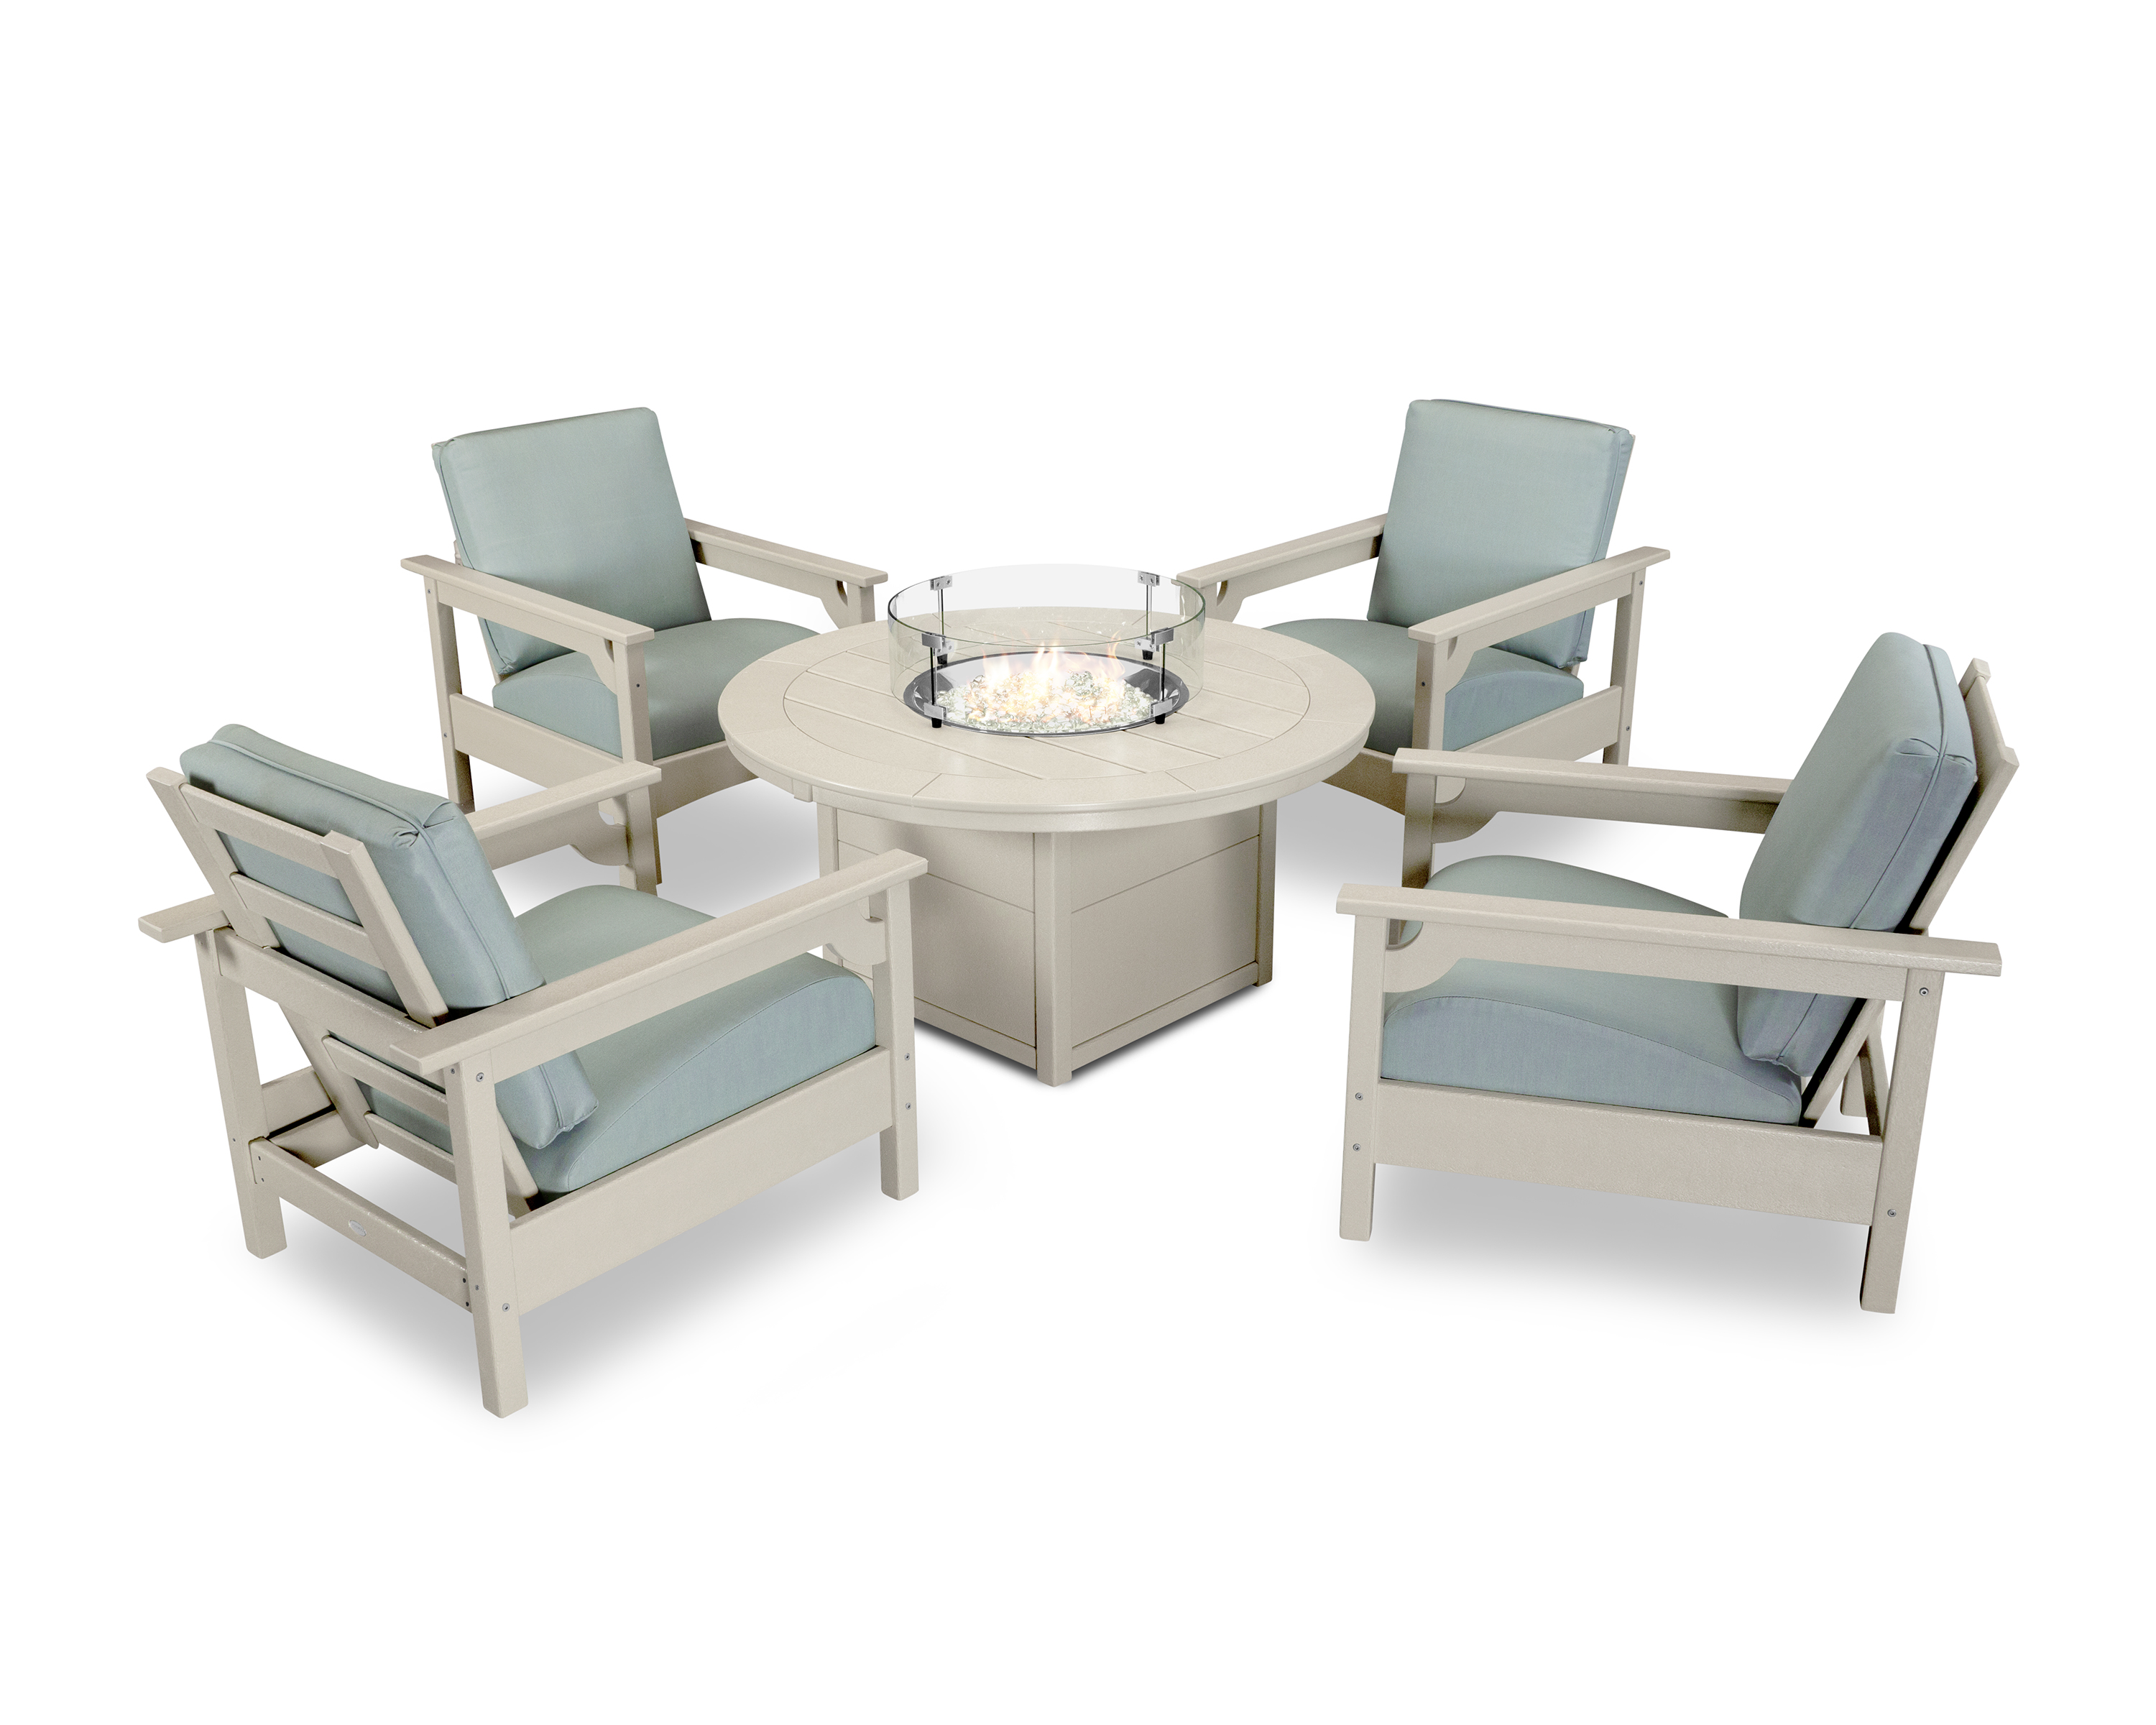 club 5-piece conversation set with fire pit table in sand / spa product image